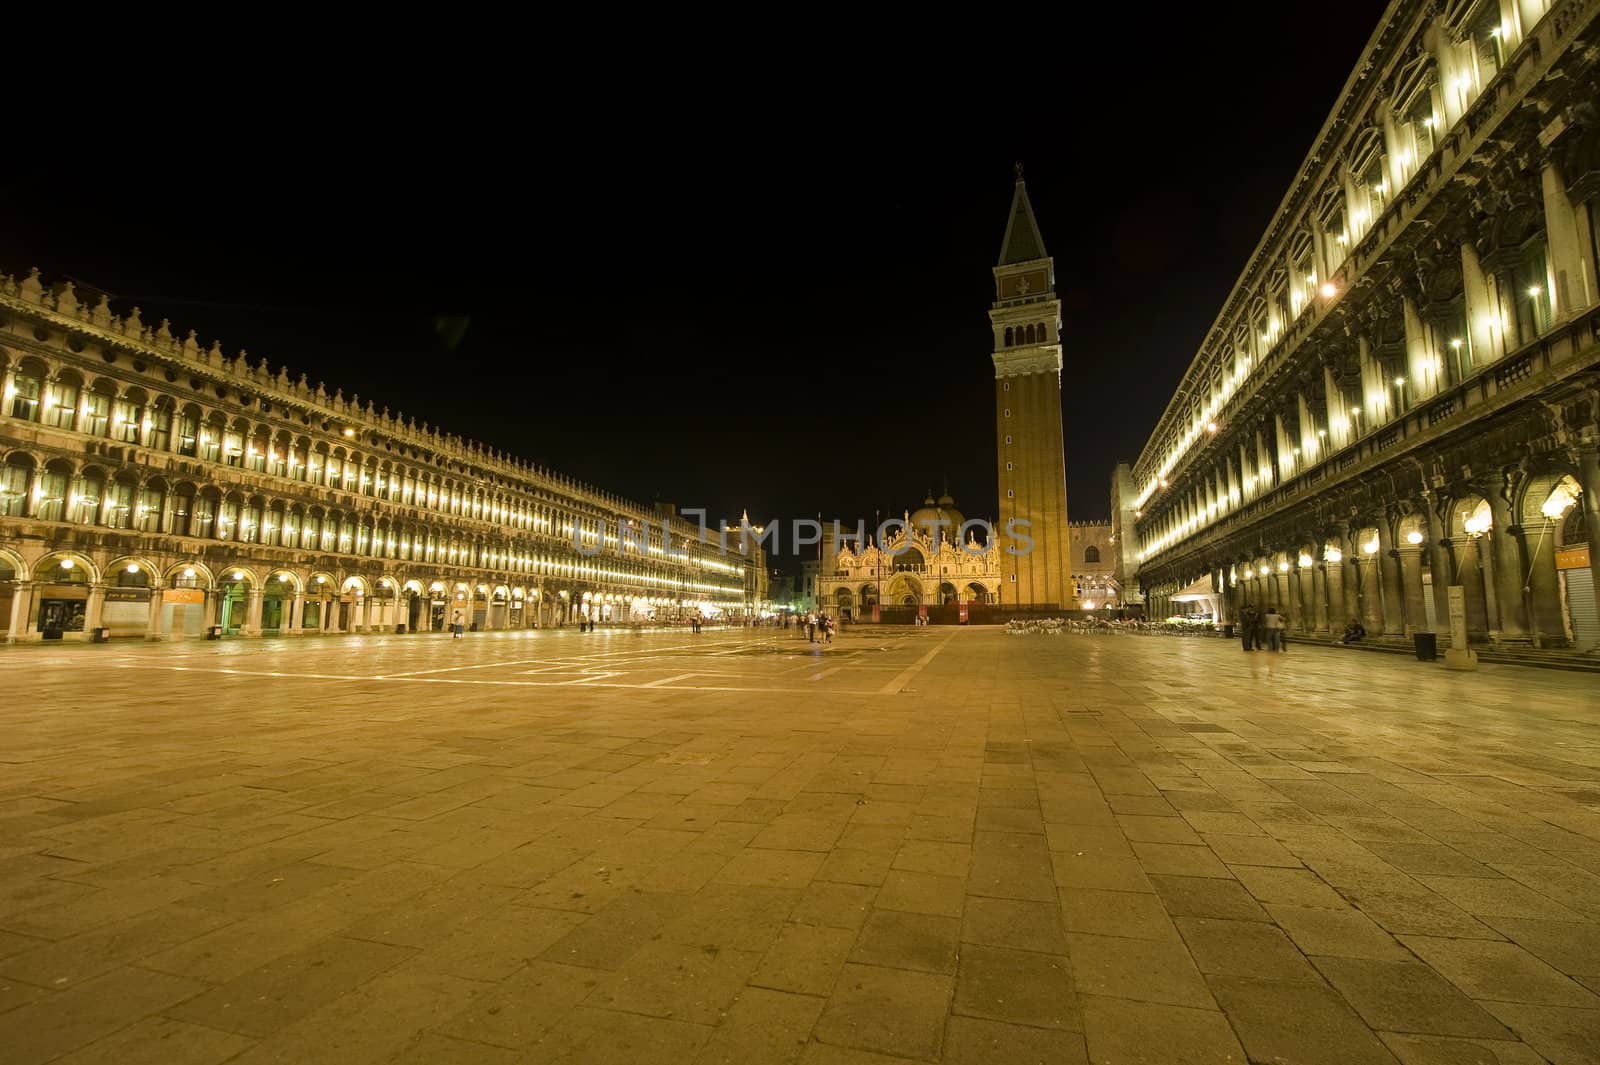 Venice: St. Marks square at night by stockbymh